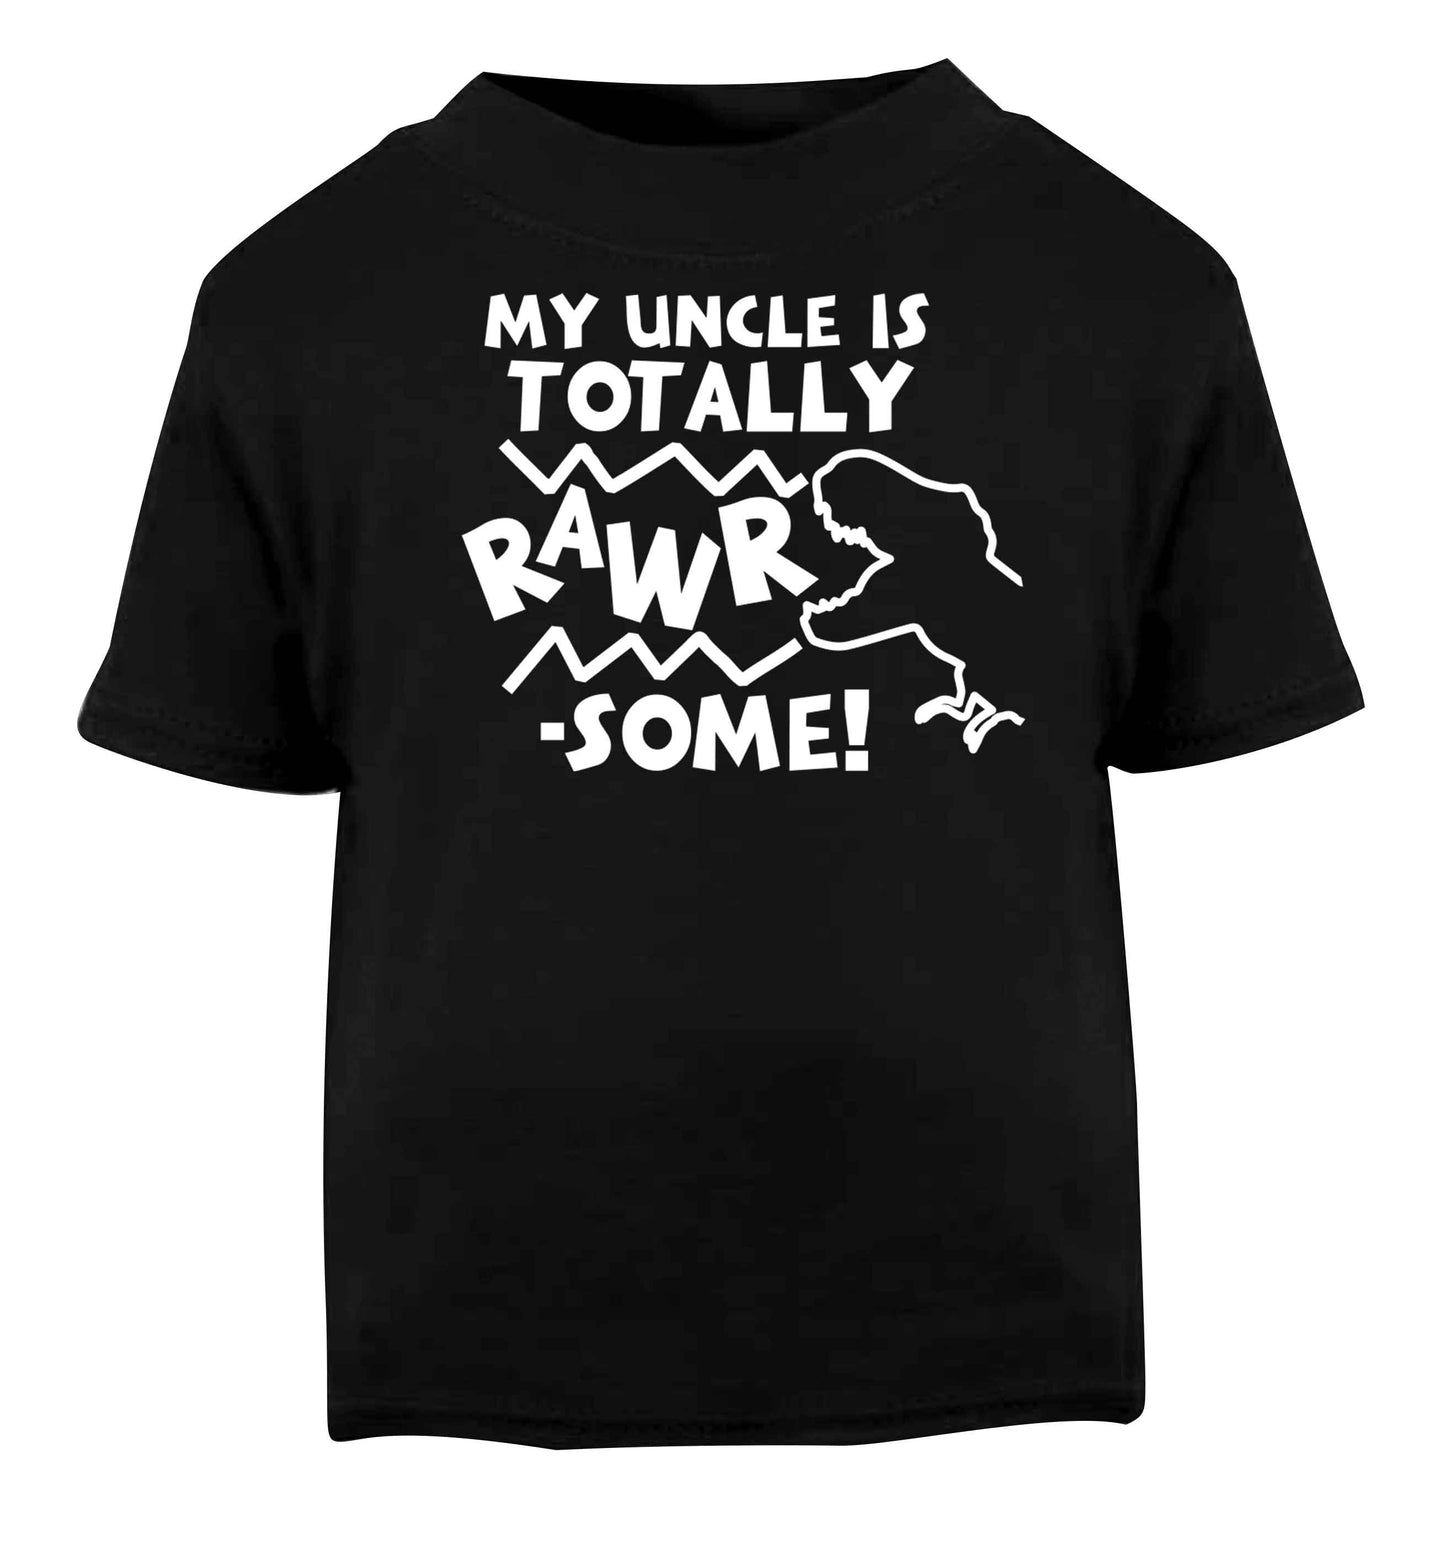 My uncle is totally rawrsome Black baby toddler Tshirt 2 years